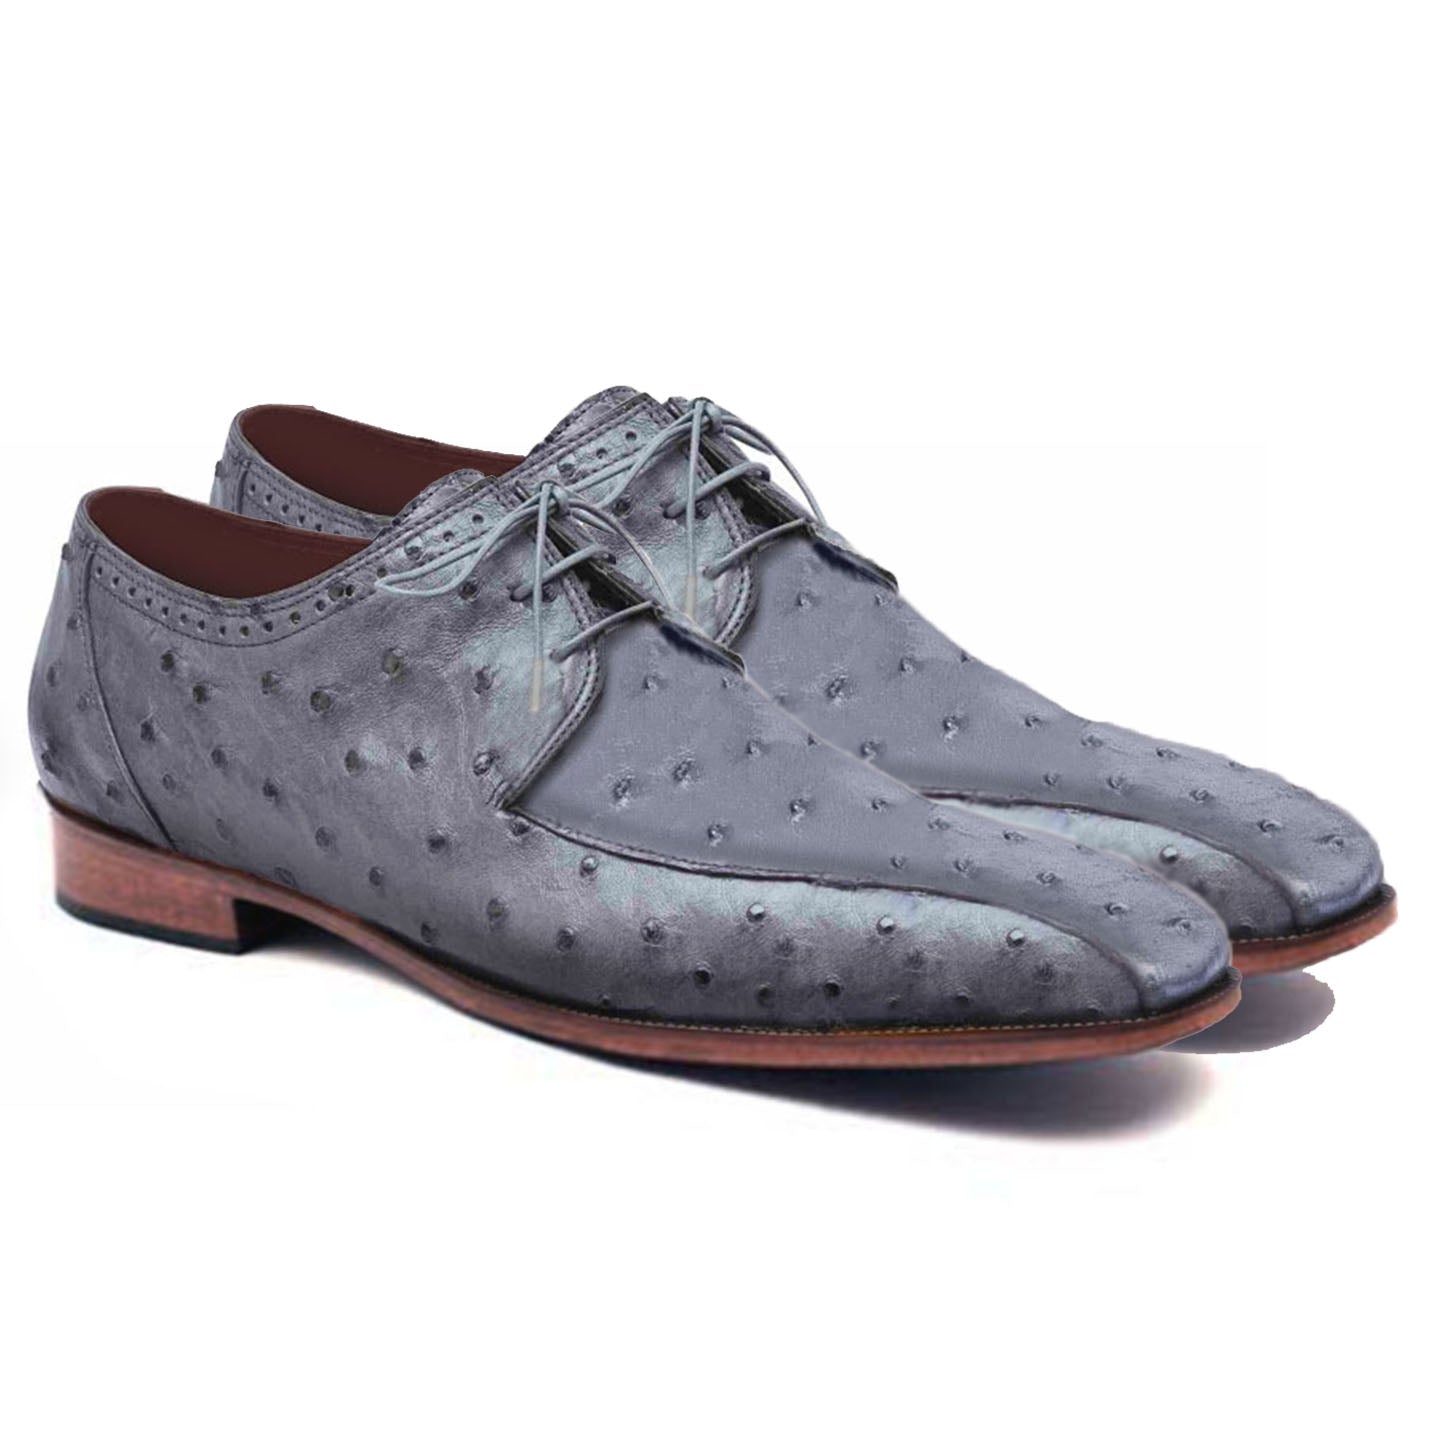 Johny Weber Handmade Grey Ostrich Leather Oxford Shoes